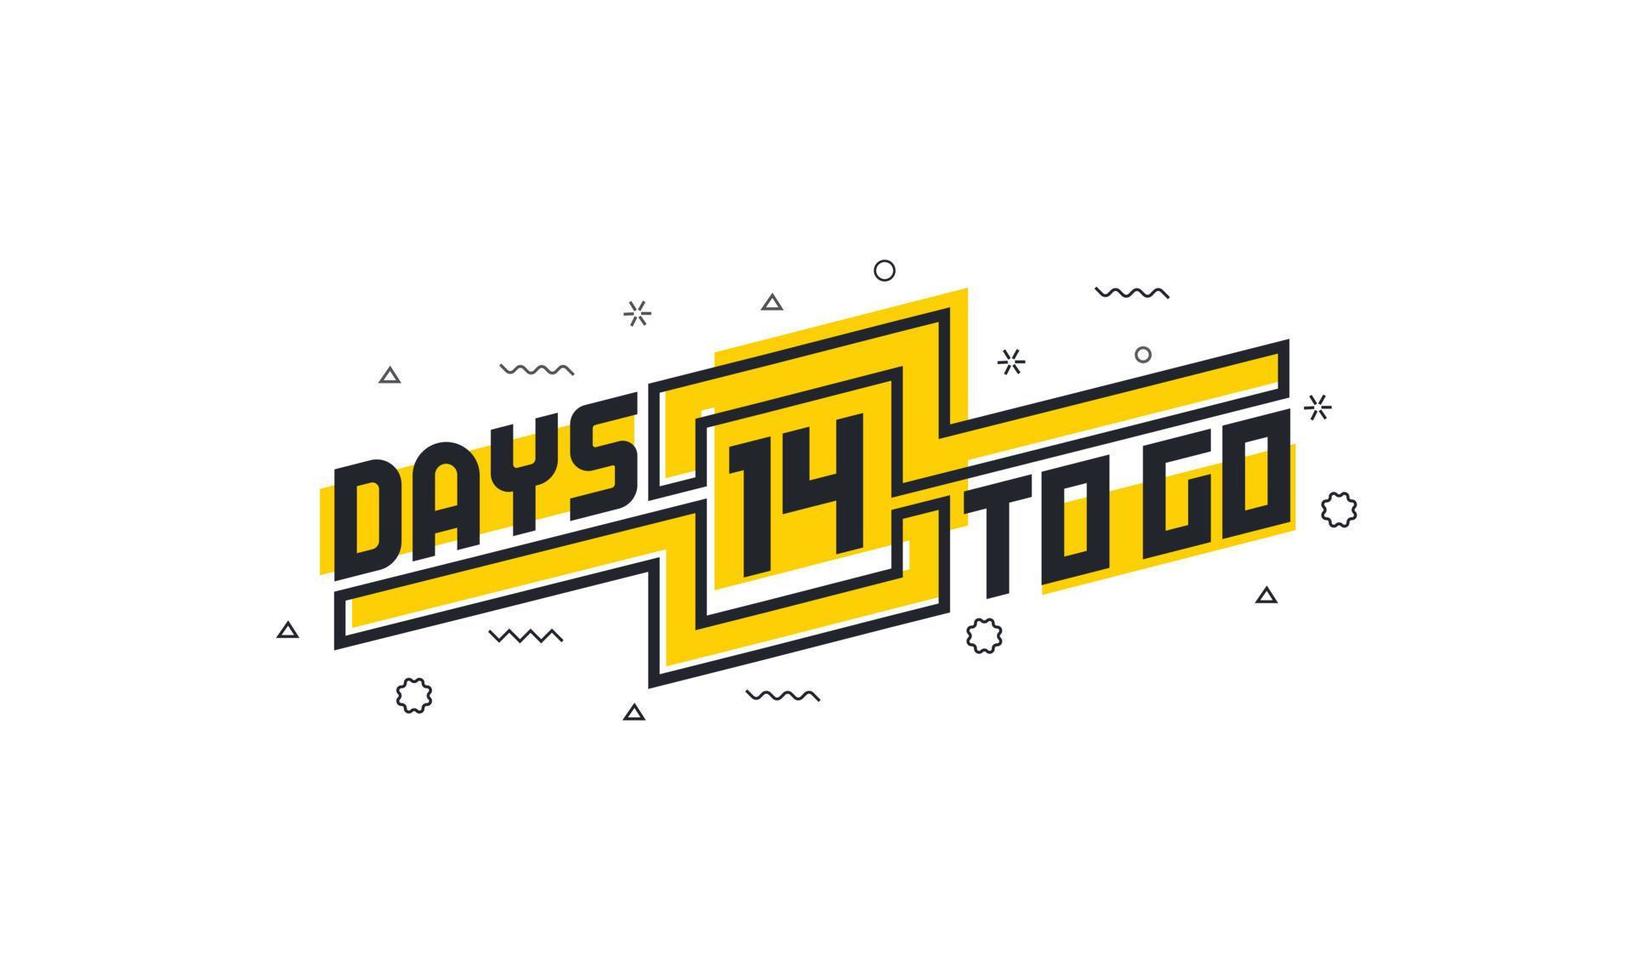 14 days to go countdown sign for sale or promotion. vector